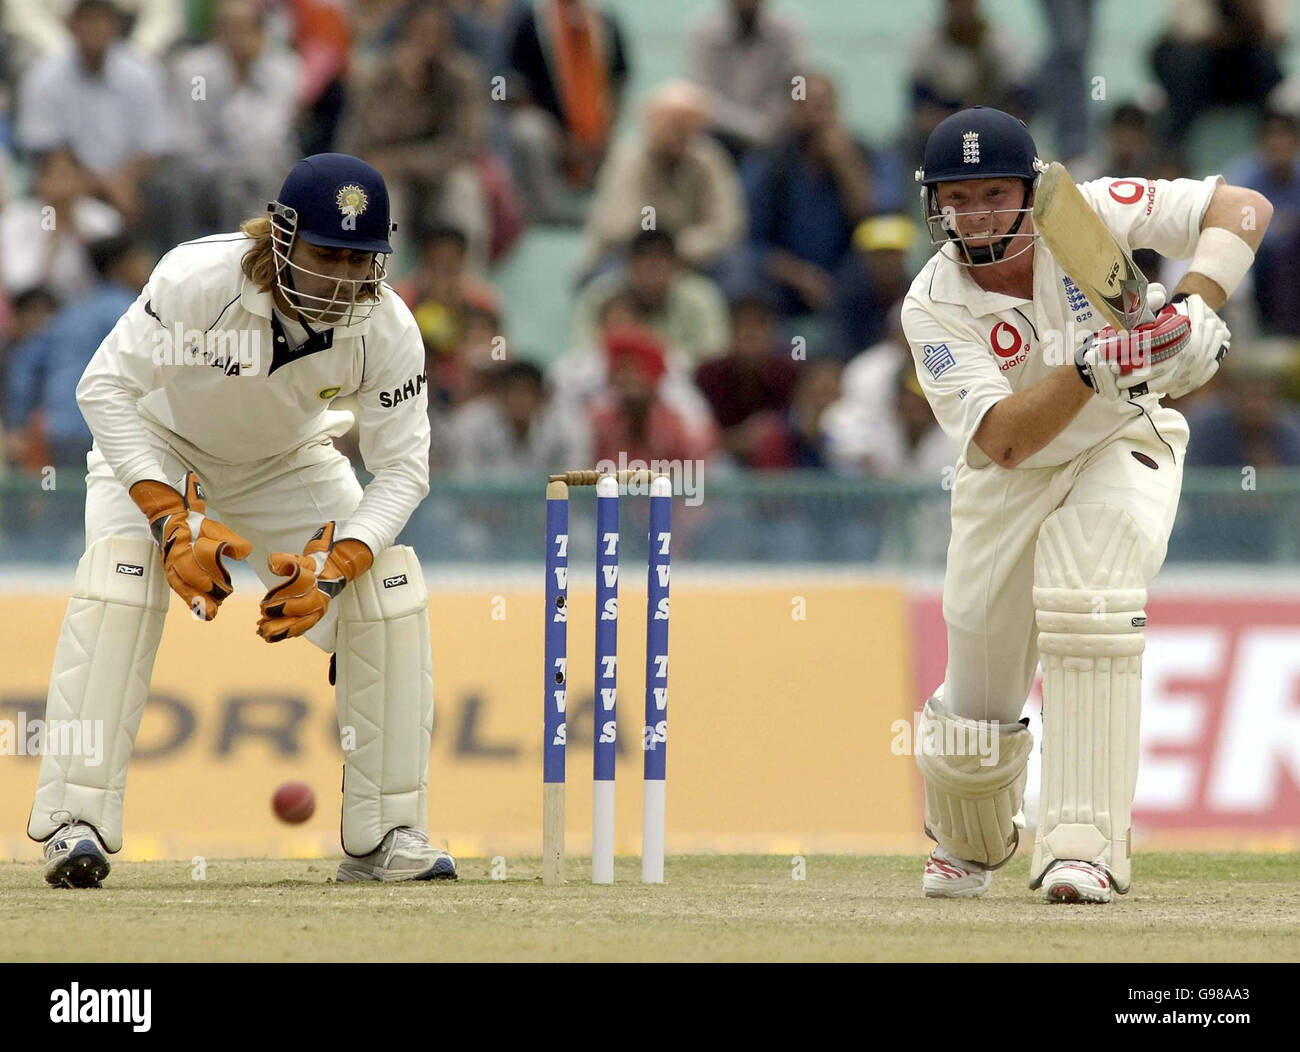 England's Ian Bell (R) in action during the first day of the second Test match at the PCA Stadium, Mohali, India, Thursday March 9, 2006. PRESS ASSOCIATION Photo. Photo credit should read: Rebecca Naden/PA. Stock Photo